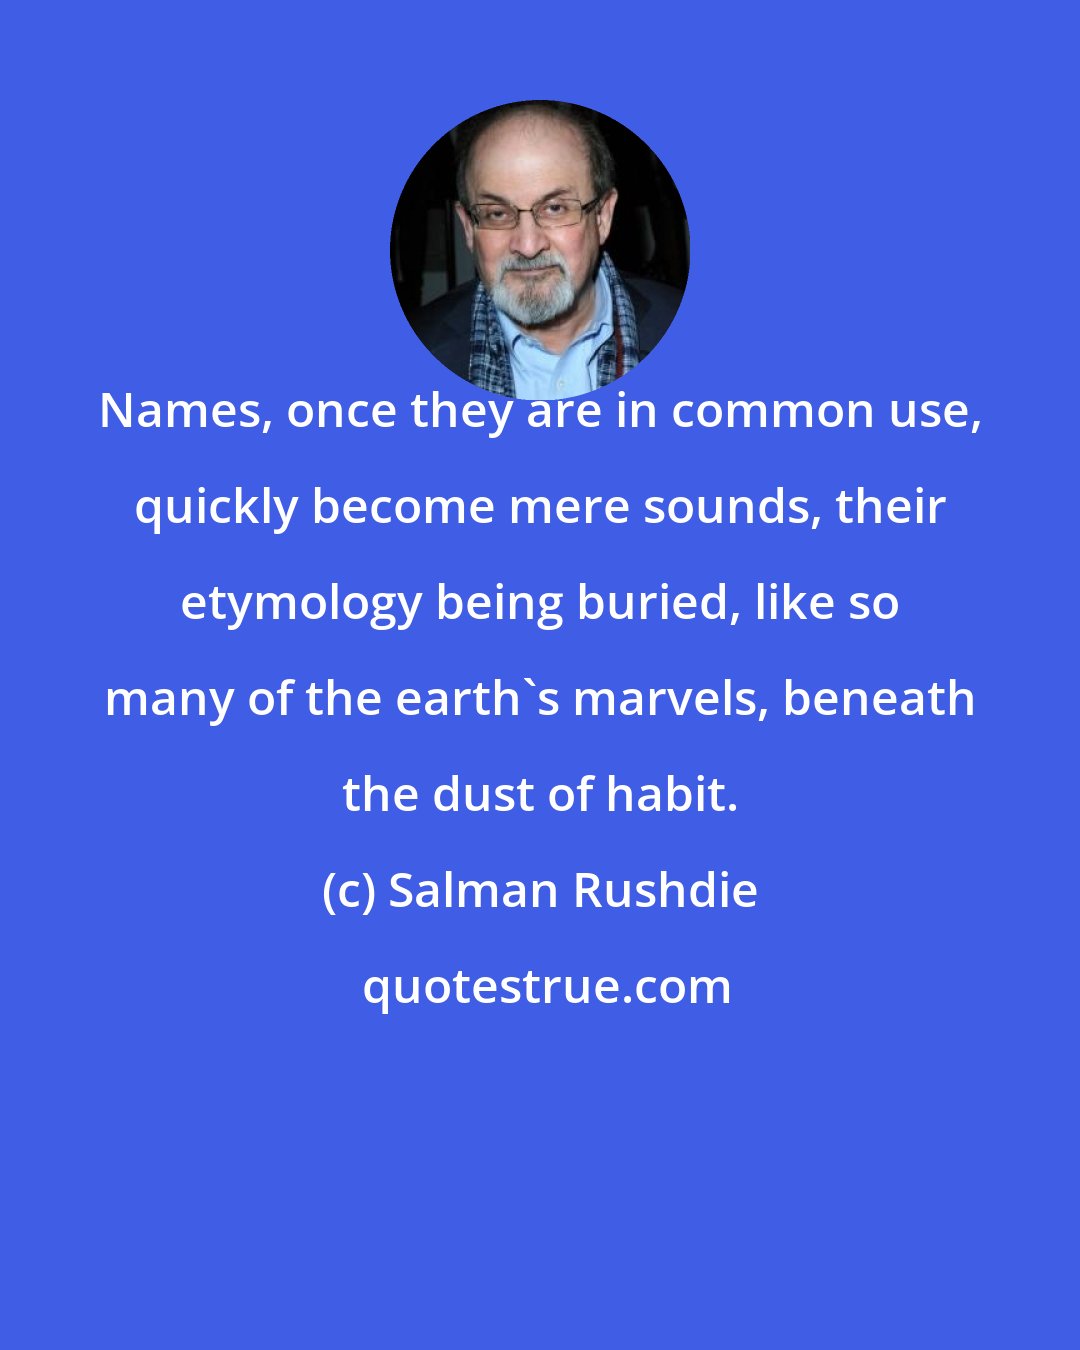 Salman Rushdie: Names, once they are in common use, quickly become mere sounds, their etymology being buried, like so many of the earth's marvels, beneath the dust of habit.